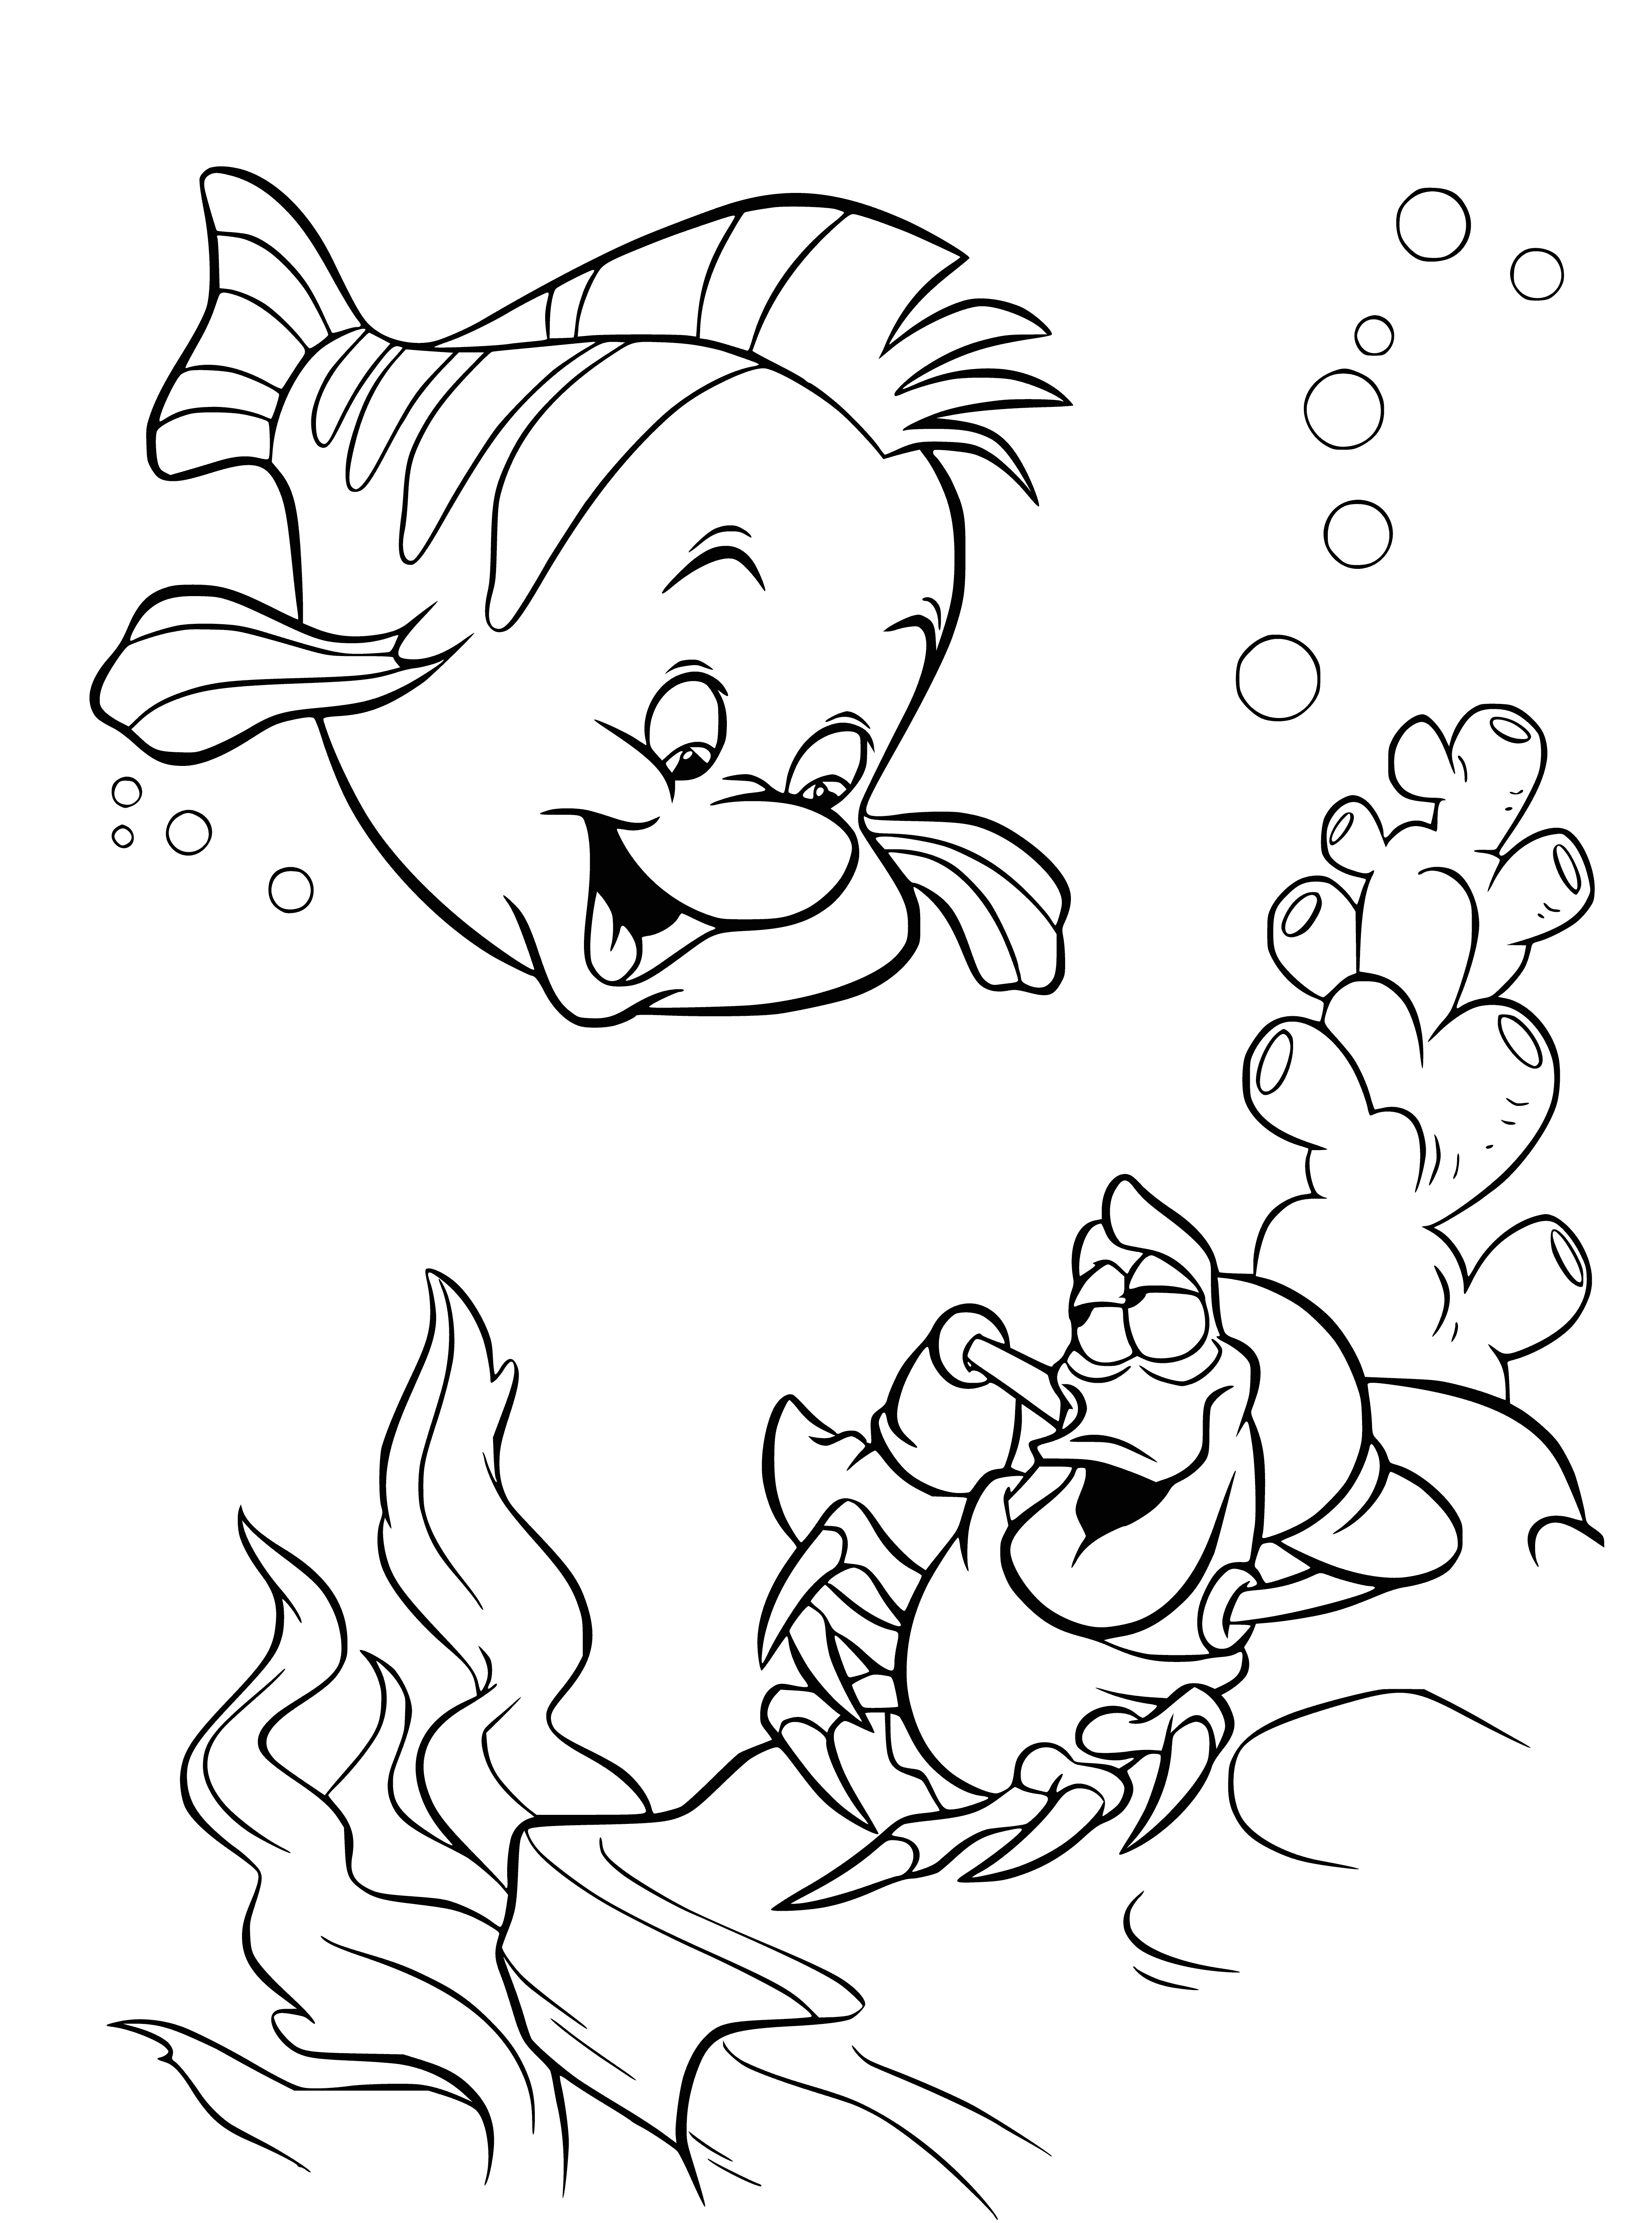 coloring page: Two fish face each other, talking, surrounded by a coral reef and plants.